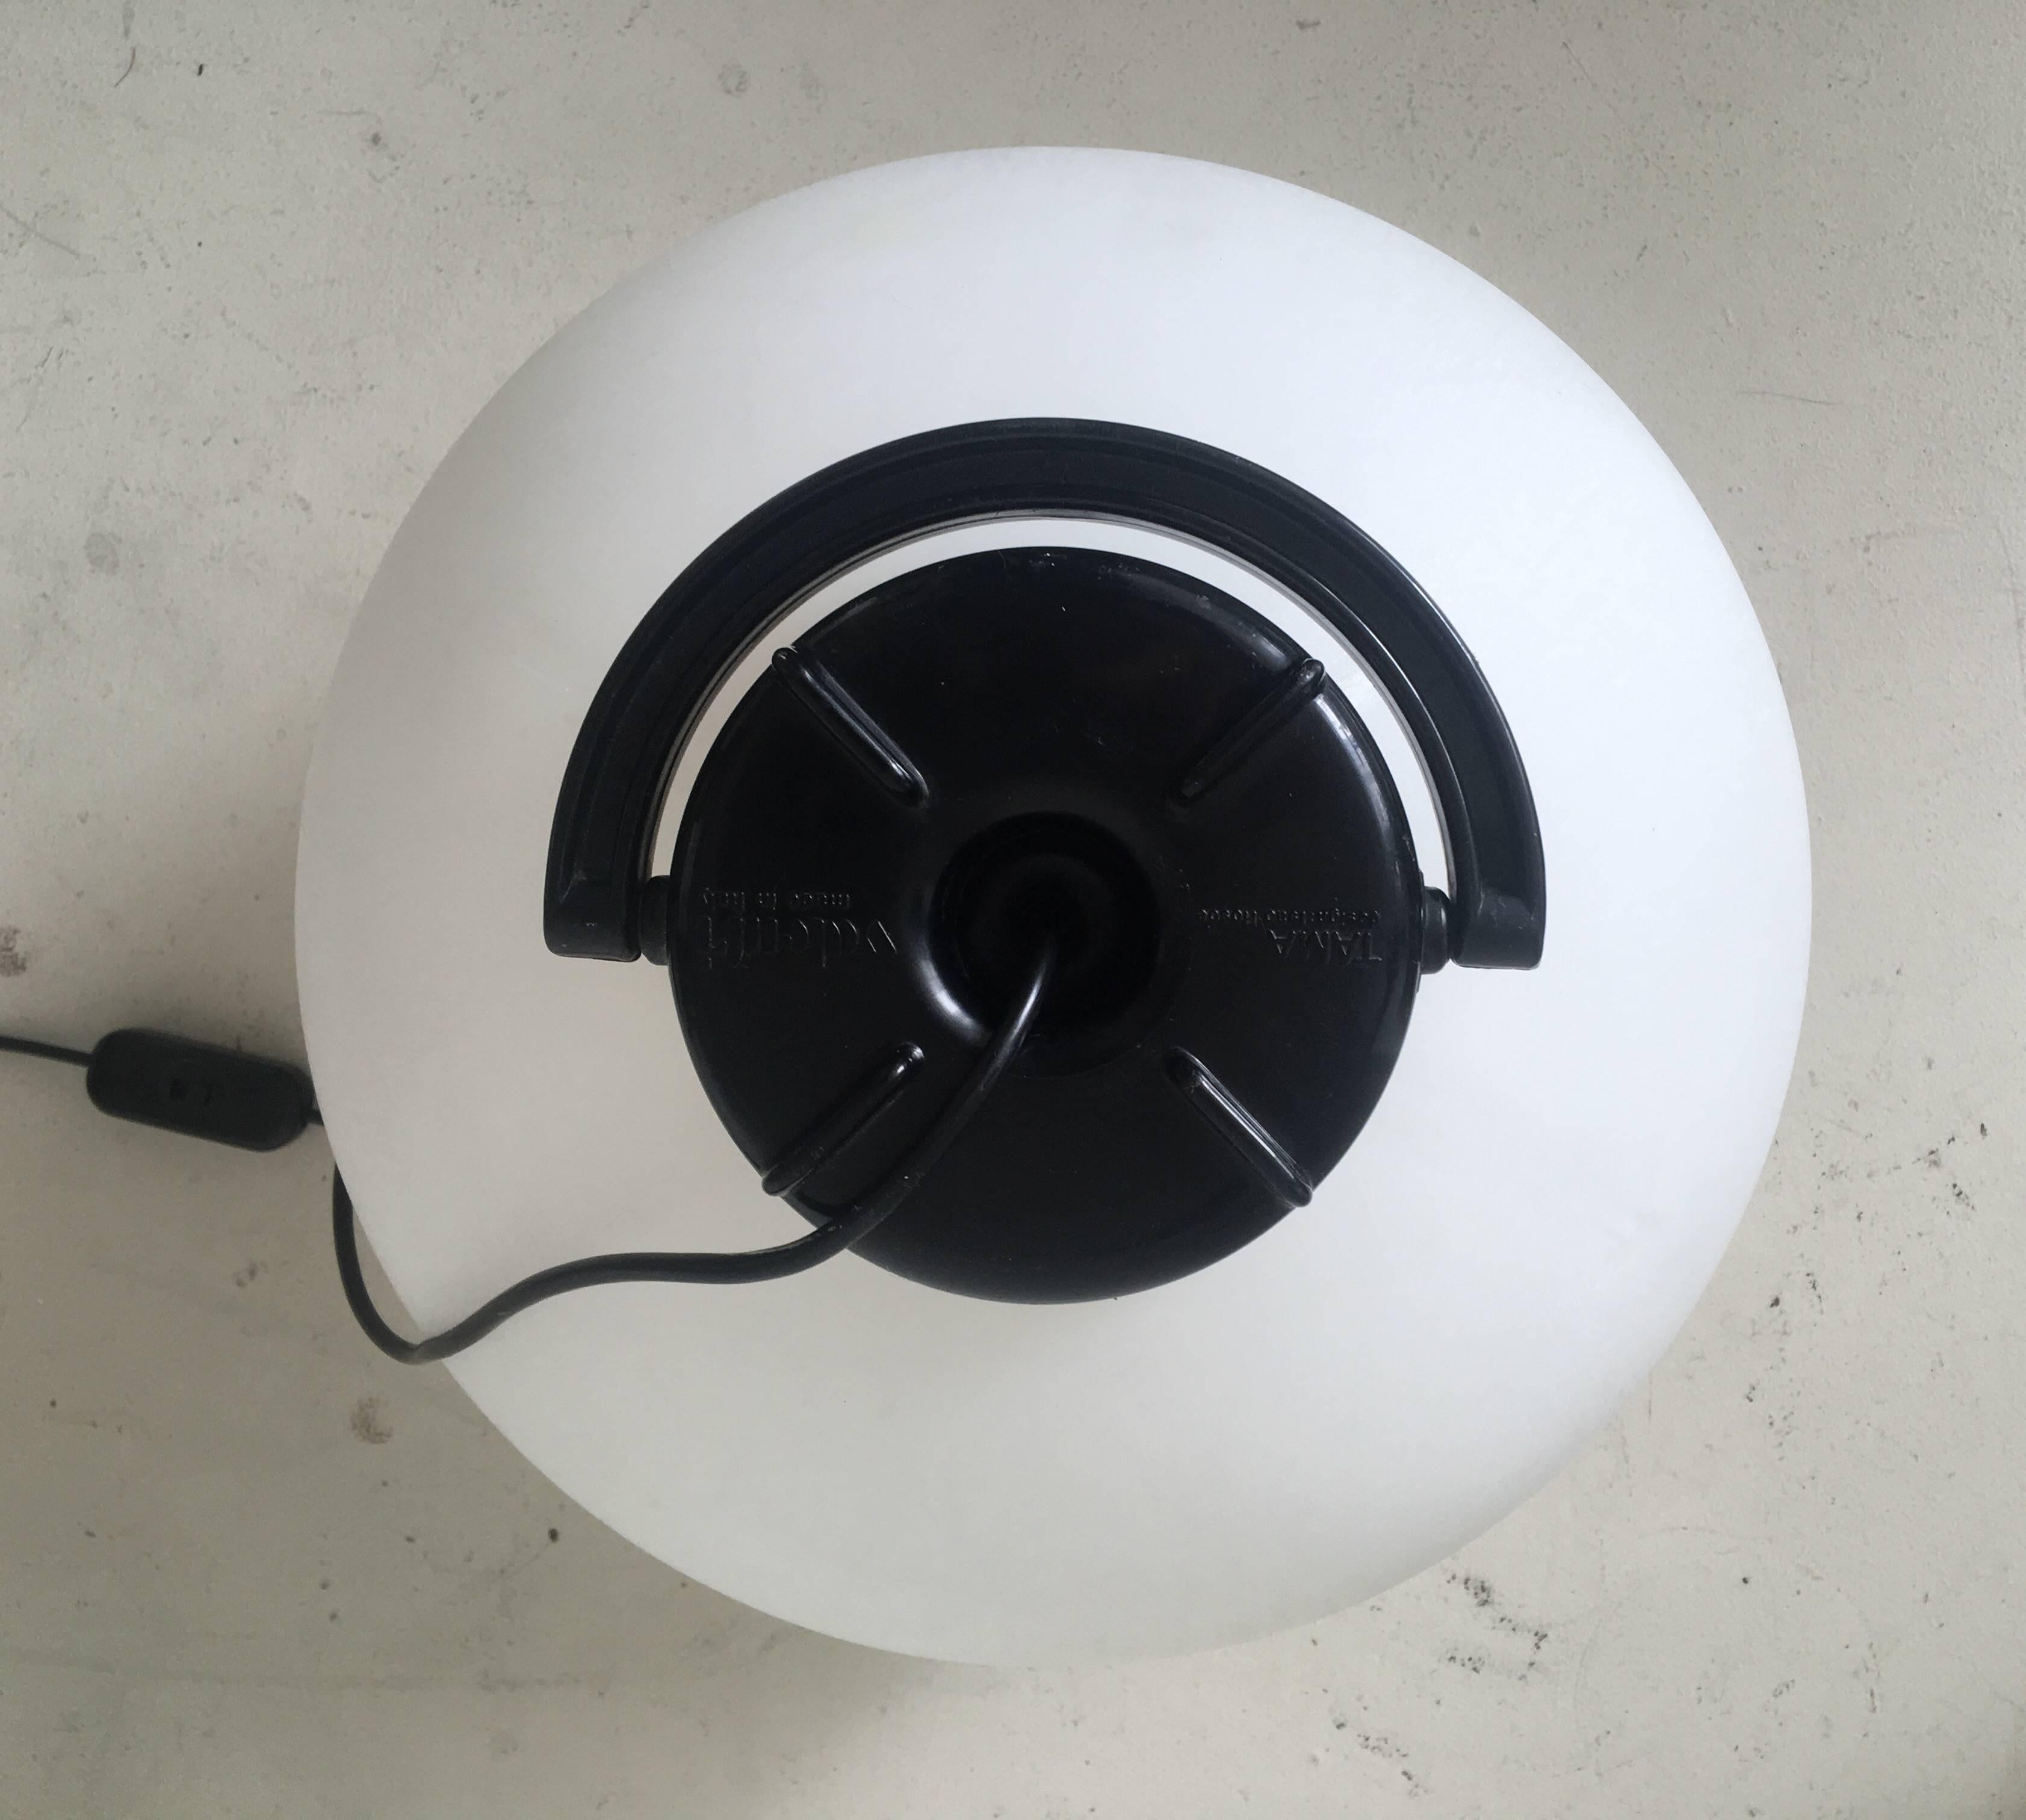 Mid-Century Modern 'Tama' Black and White Floor Lamp by Isao Hosoe for Valenti, 1975 For Sale